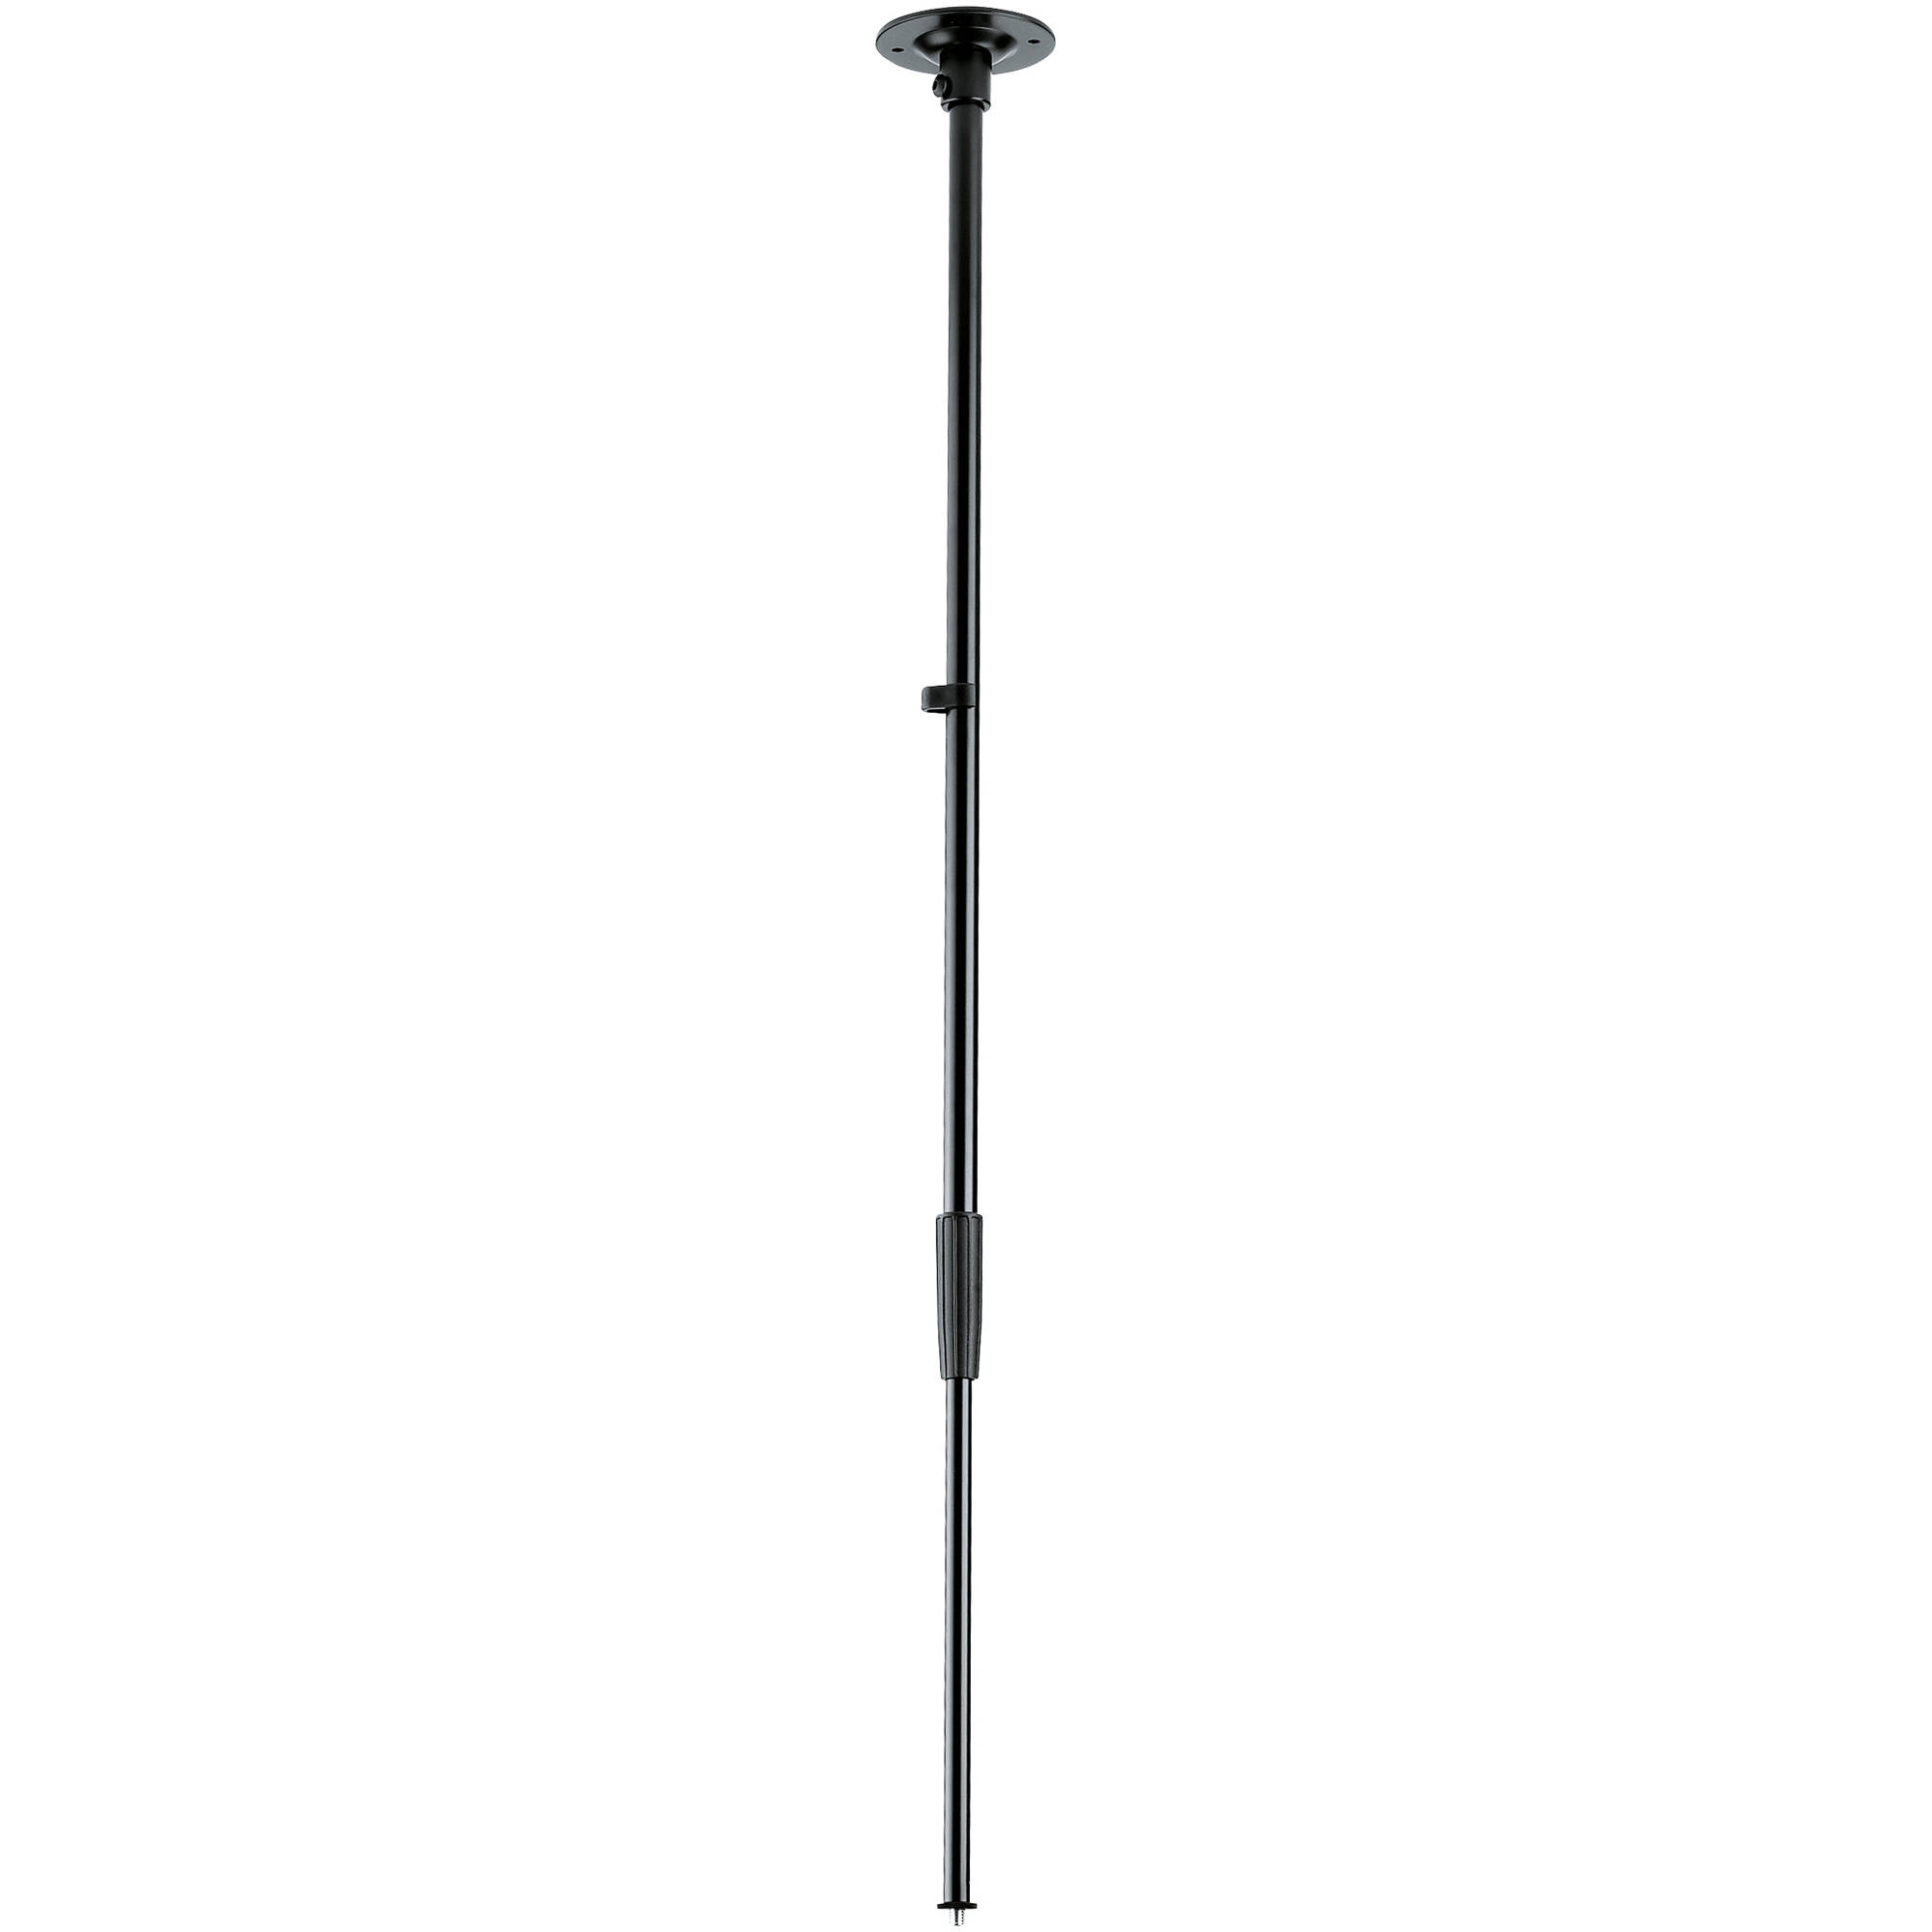 K M Ceiling Mount Microphone Stand 22150 500 55 B H Photo Video